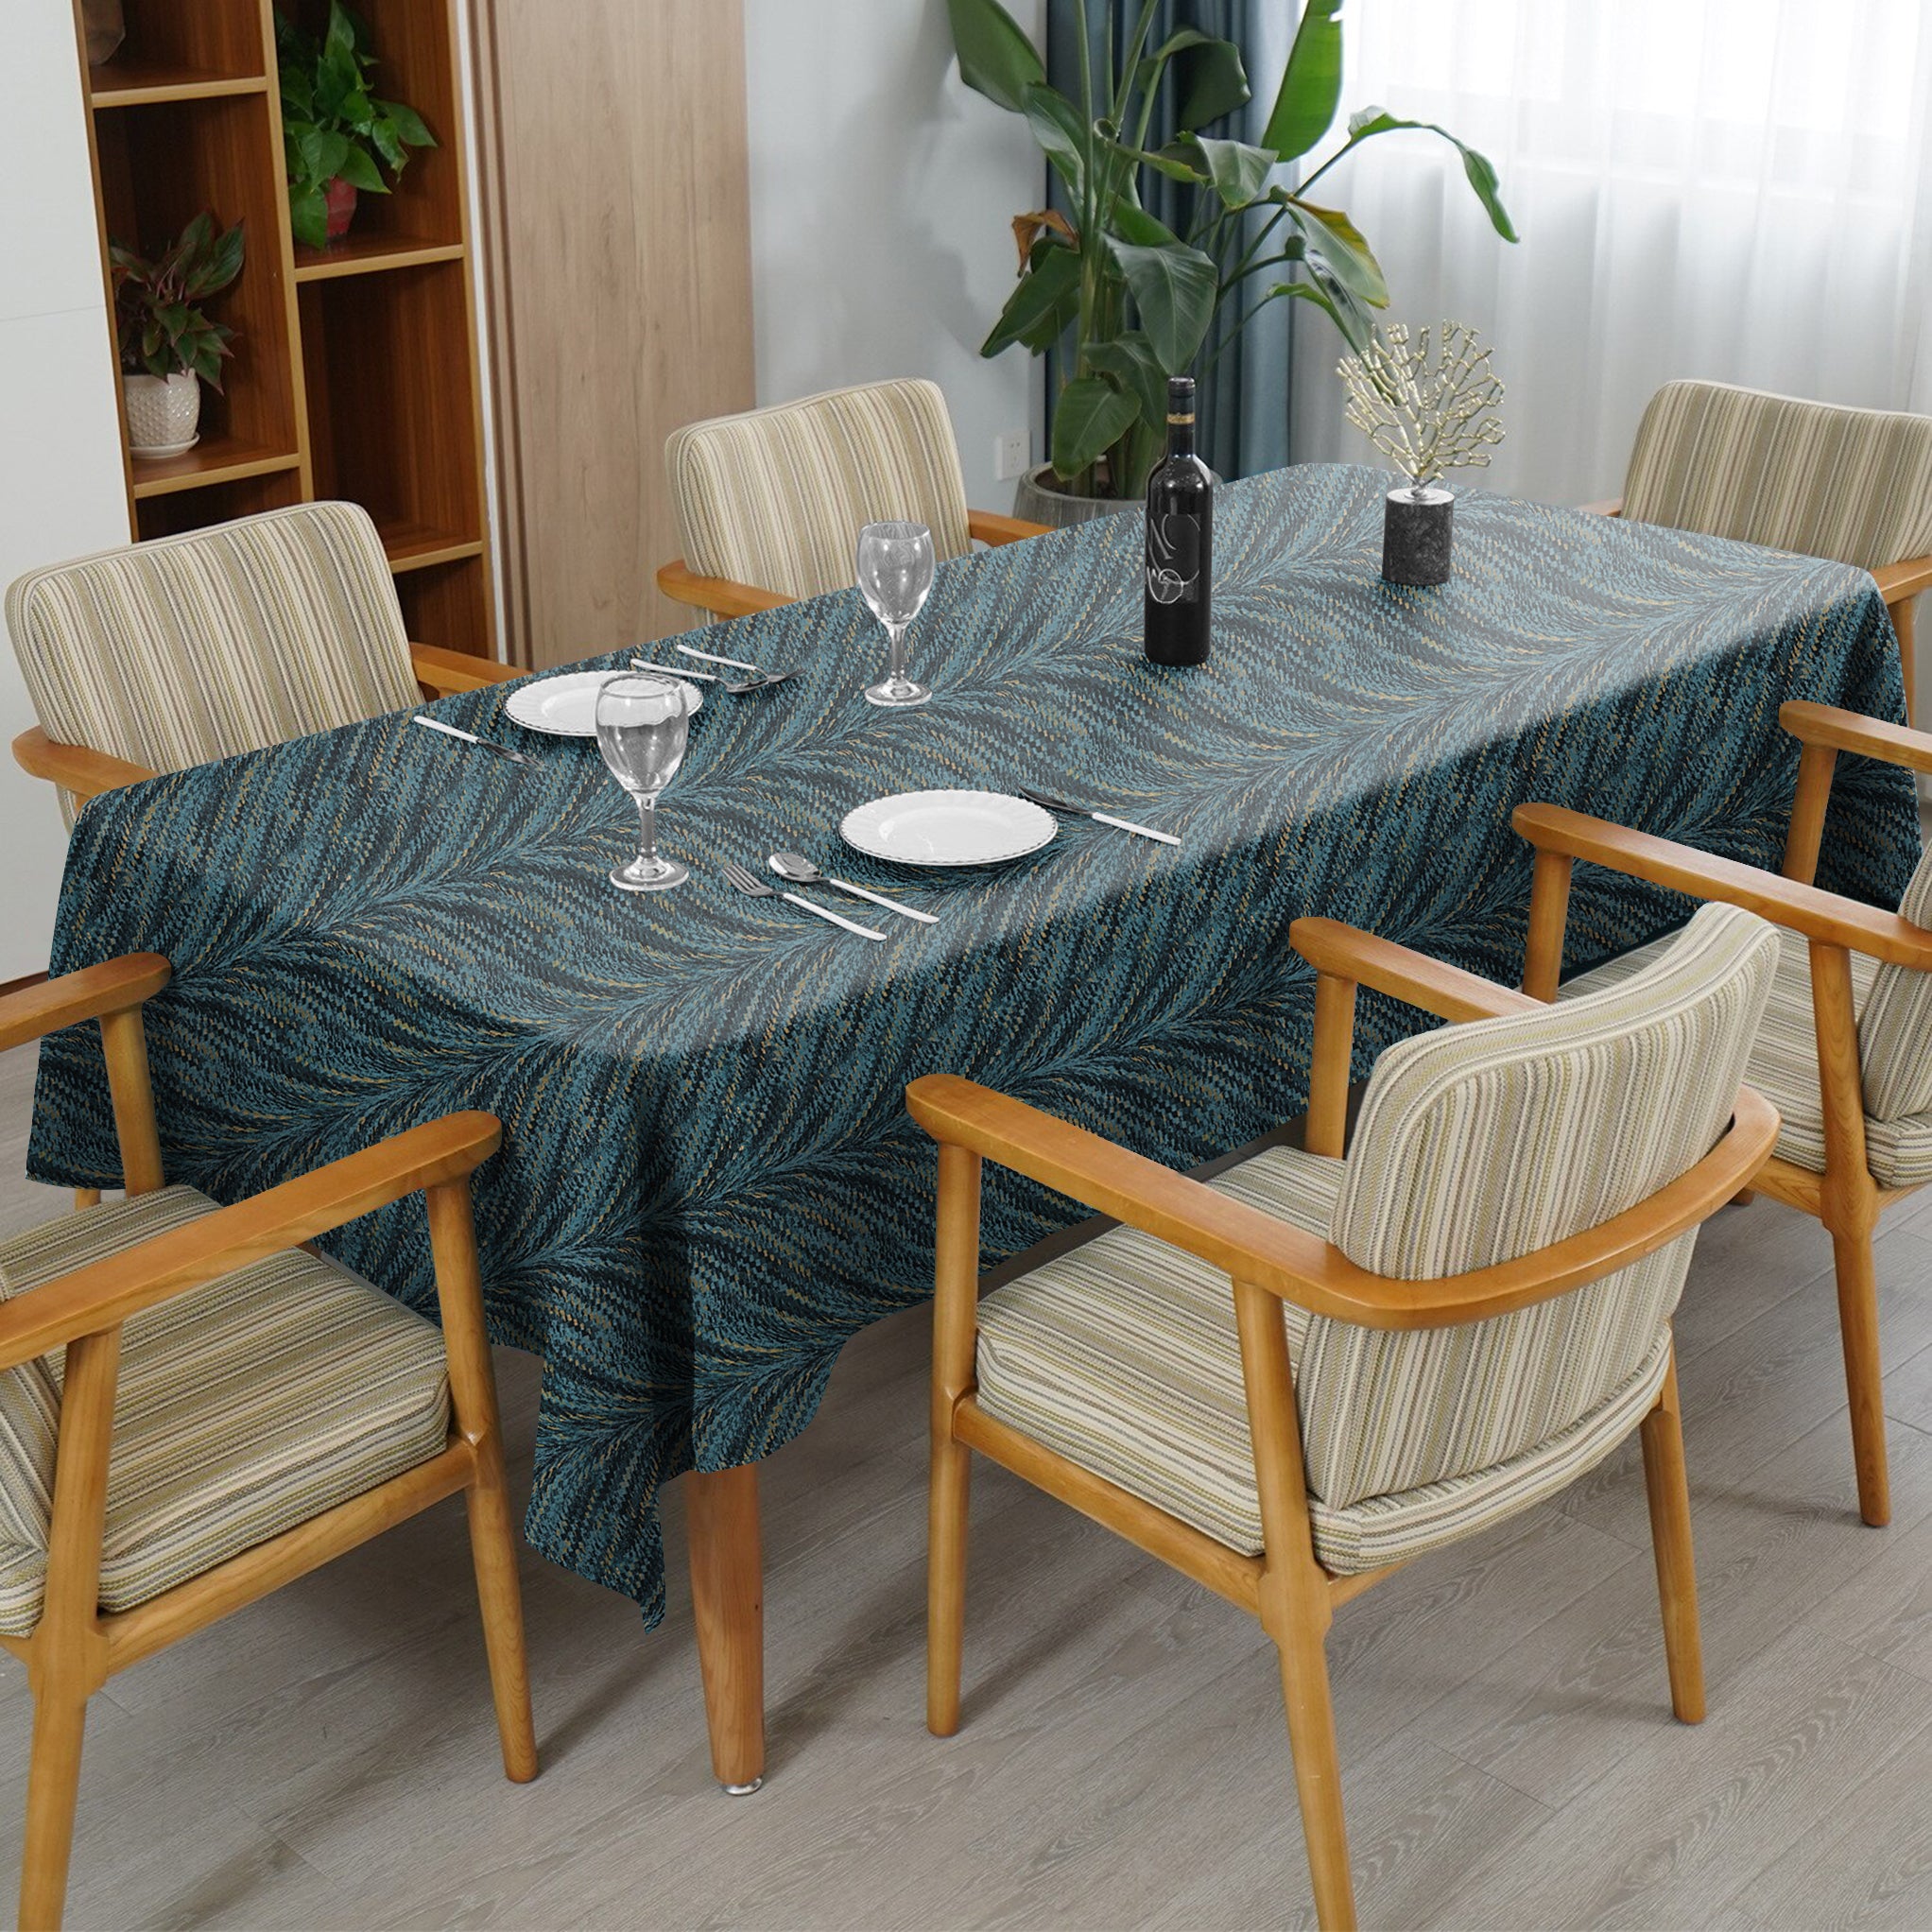 Luxor Teal 6 Seater Table Cloth